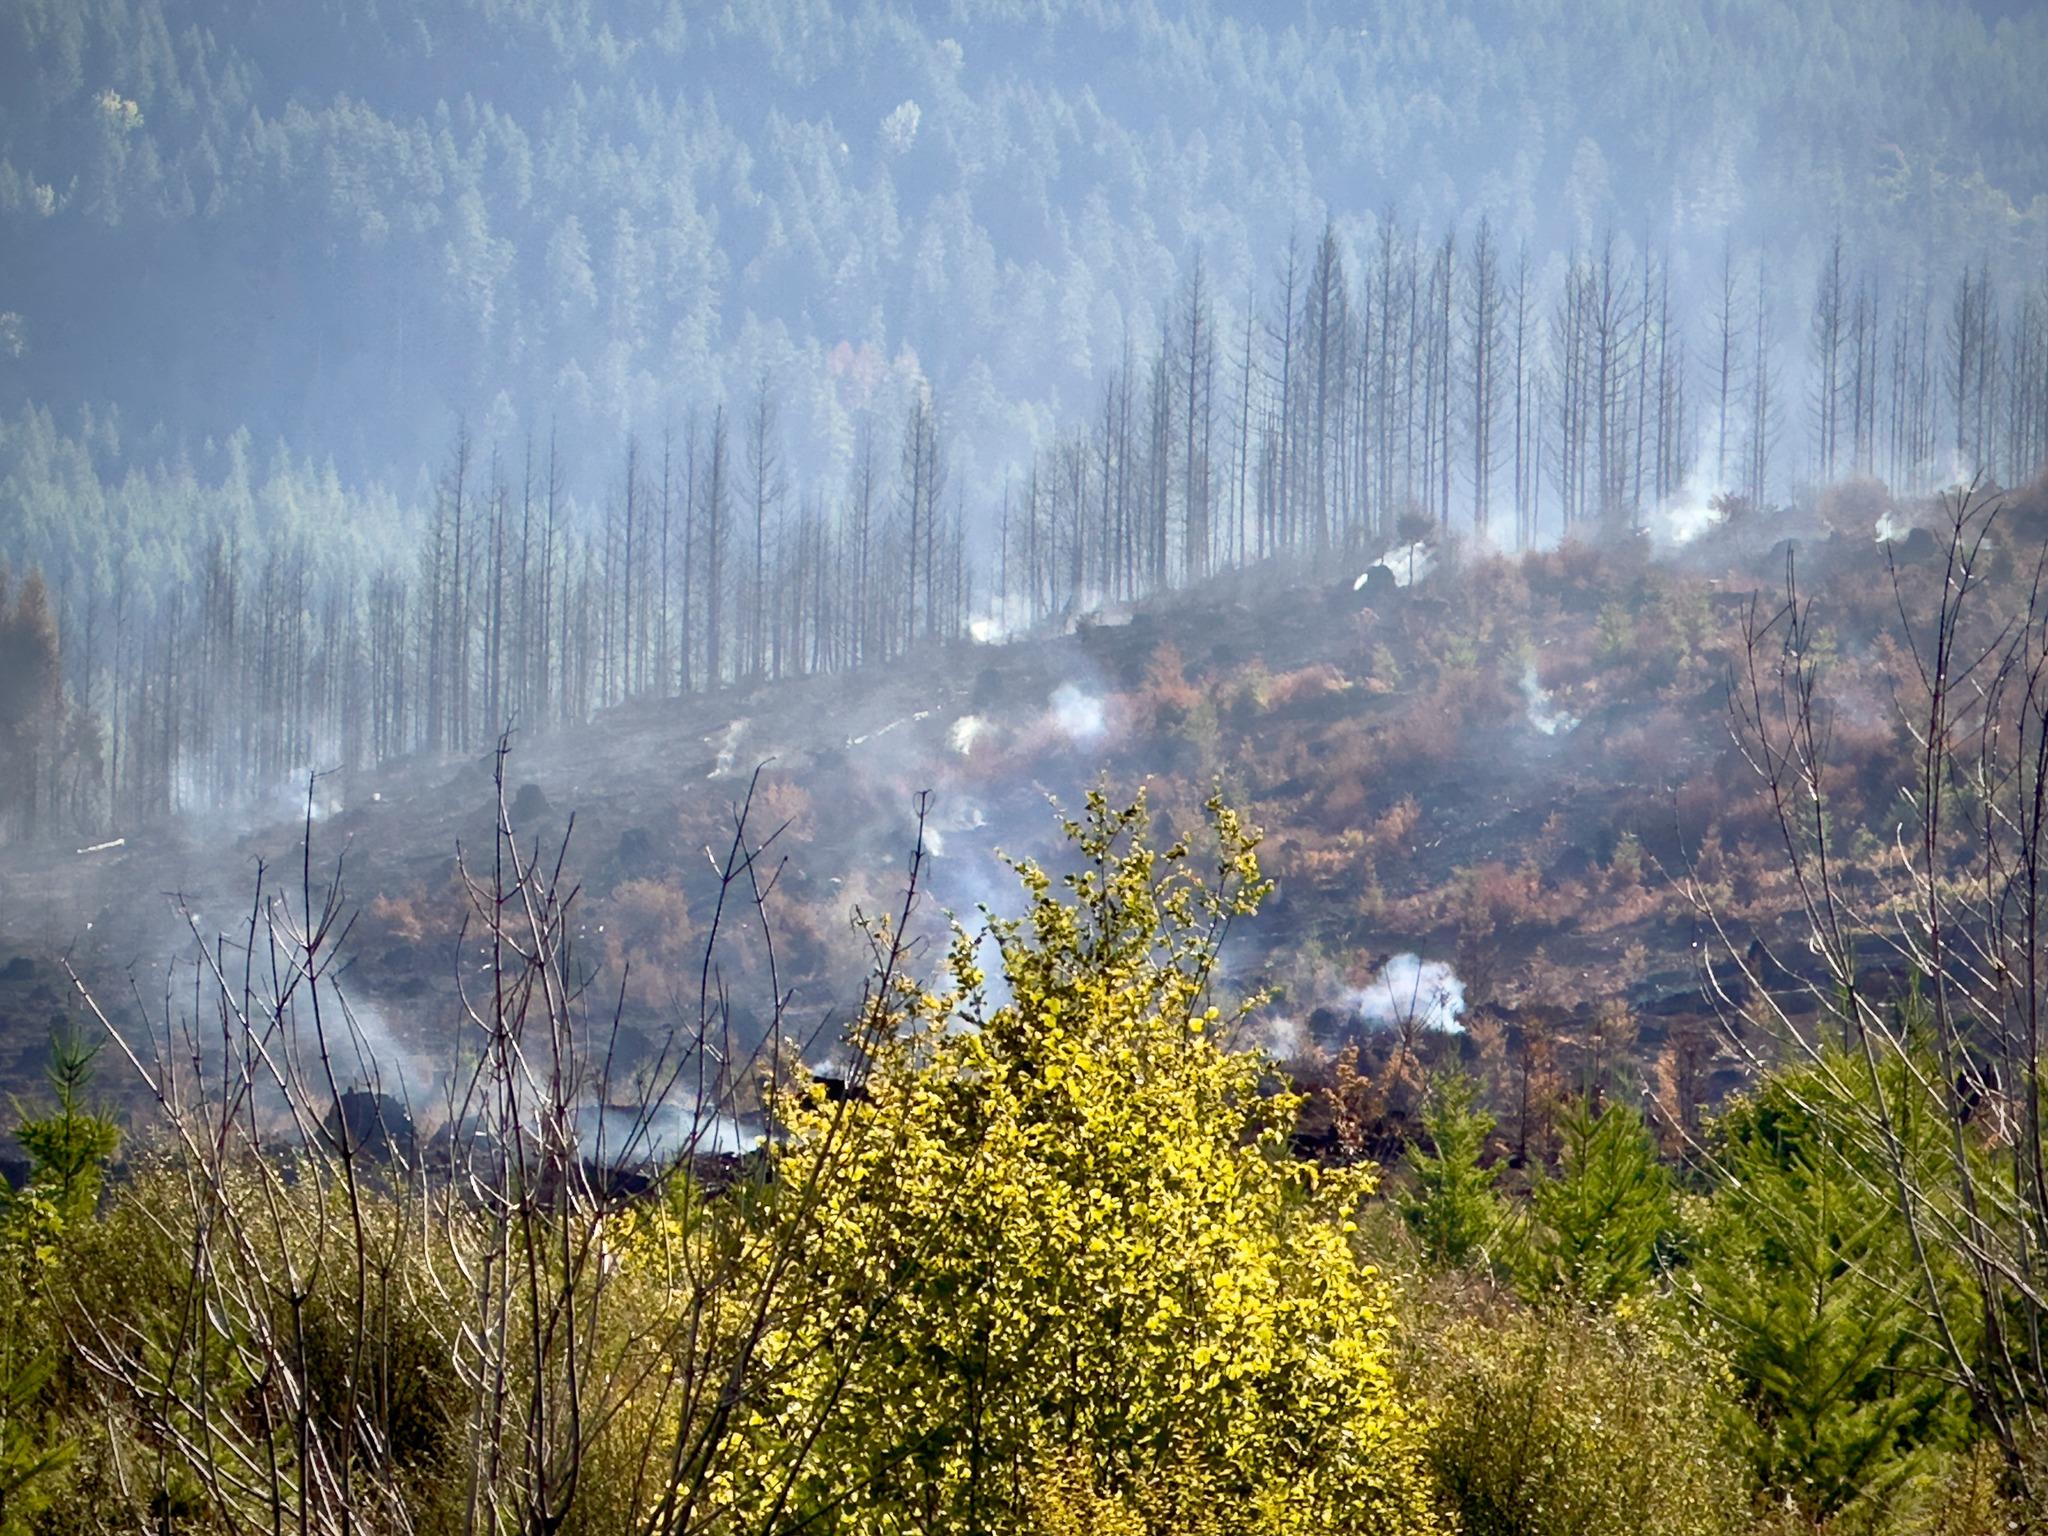 A view of smoky trees on a mountainside